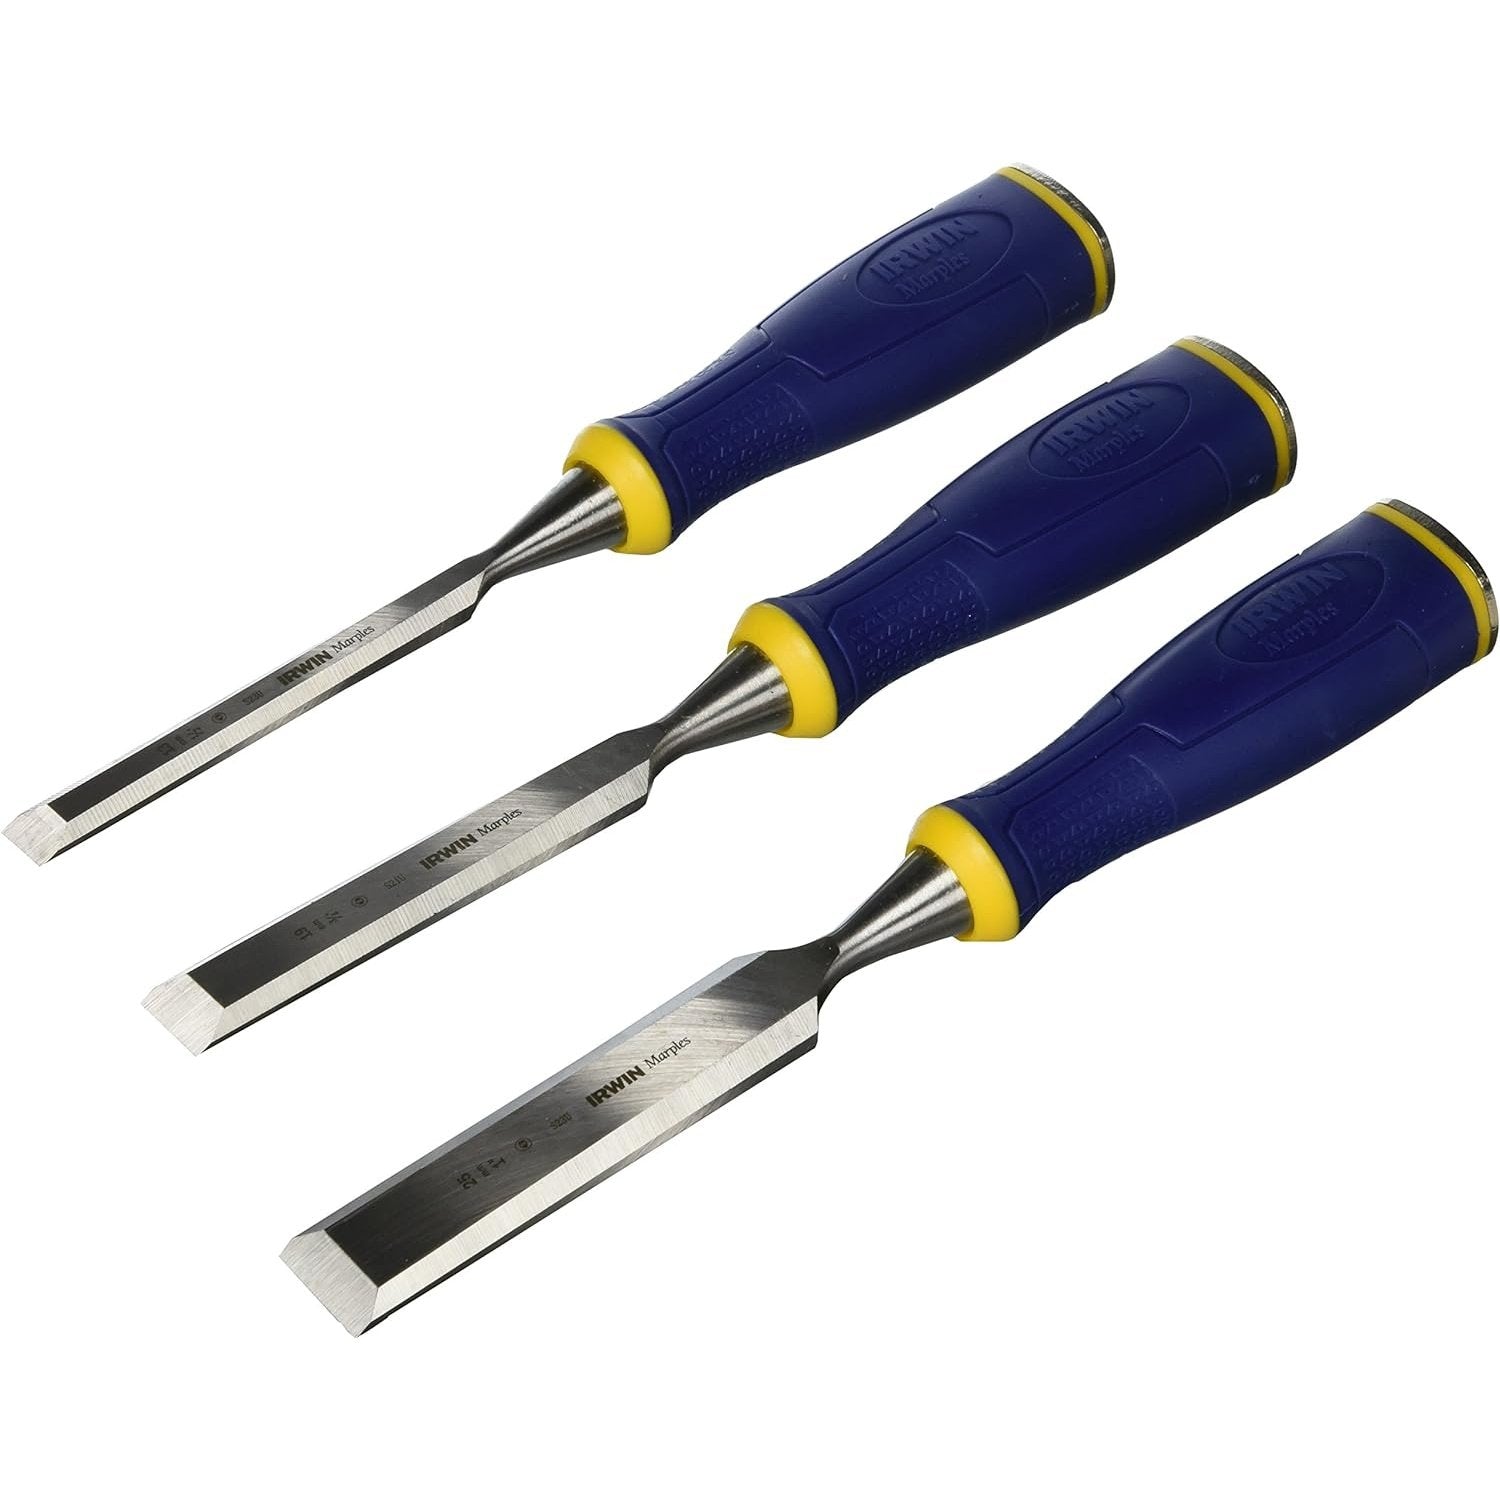 Irwin 3 Pieces Marple Wood Chisel Set - MARS500S3 | Supply Master, Accra, Ghana Chisels Files Planes & Punches Buy Tools hardware Building materials